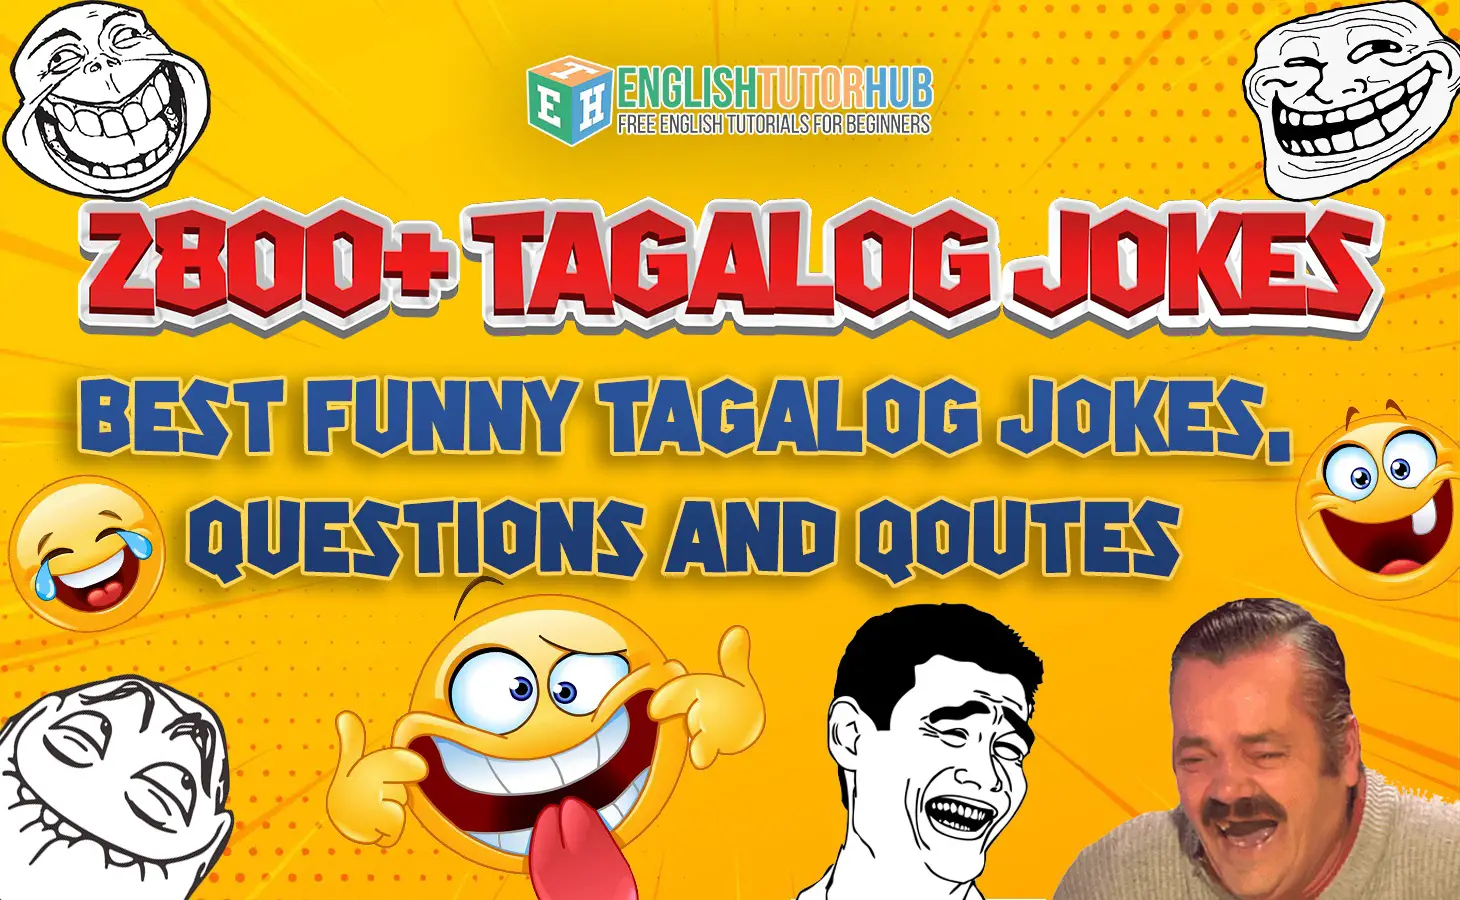 2800+ Tagalog Jokes - Best Funny Tagalog Jokes, Questions And Qoutes